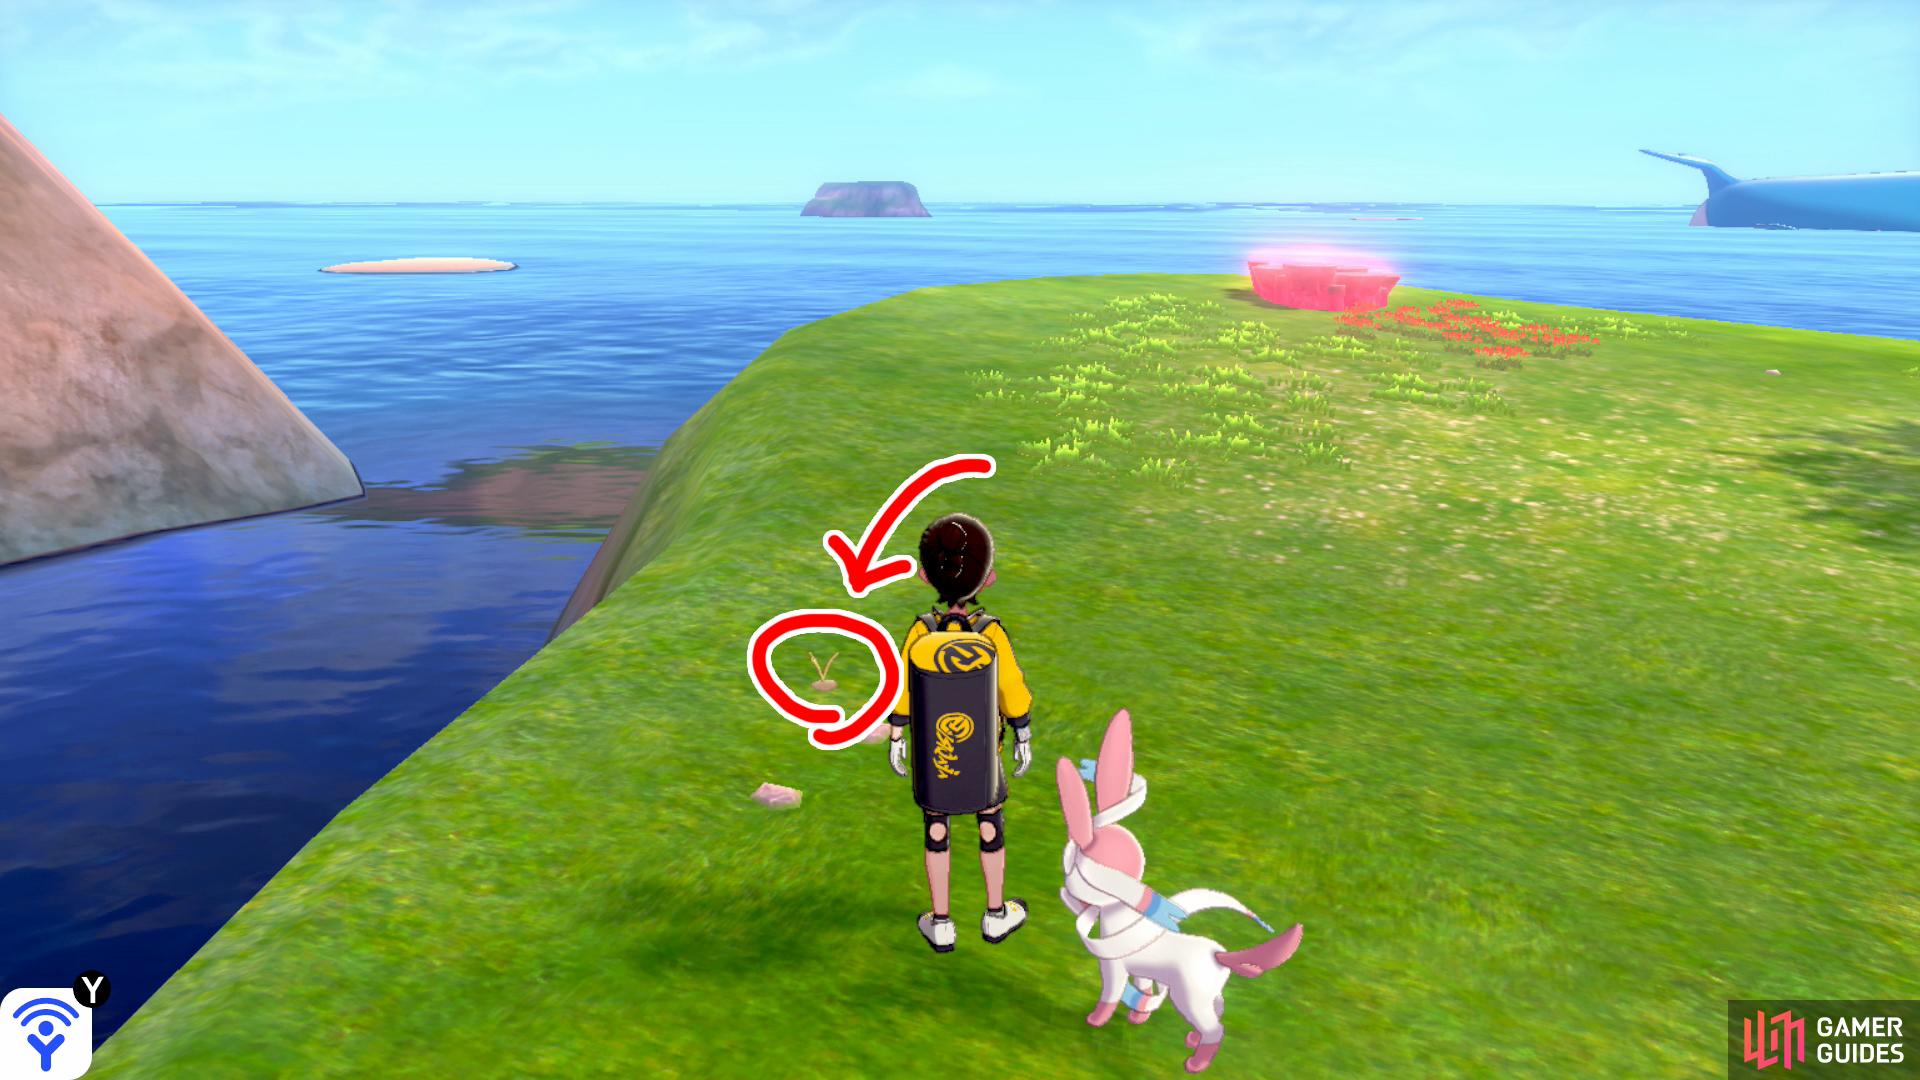 7/18: From Diglett 6, go to the Pokémon Den by the cliff edge, then follow the river left. Next to some small pebbles, just before the tall grass.